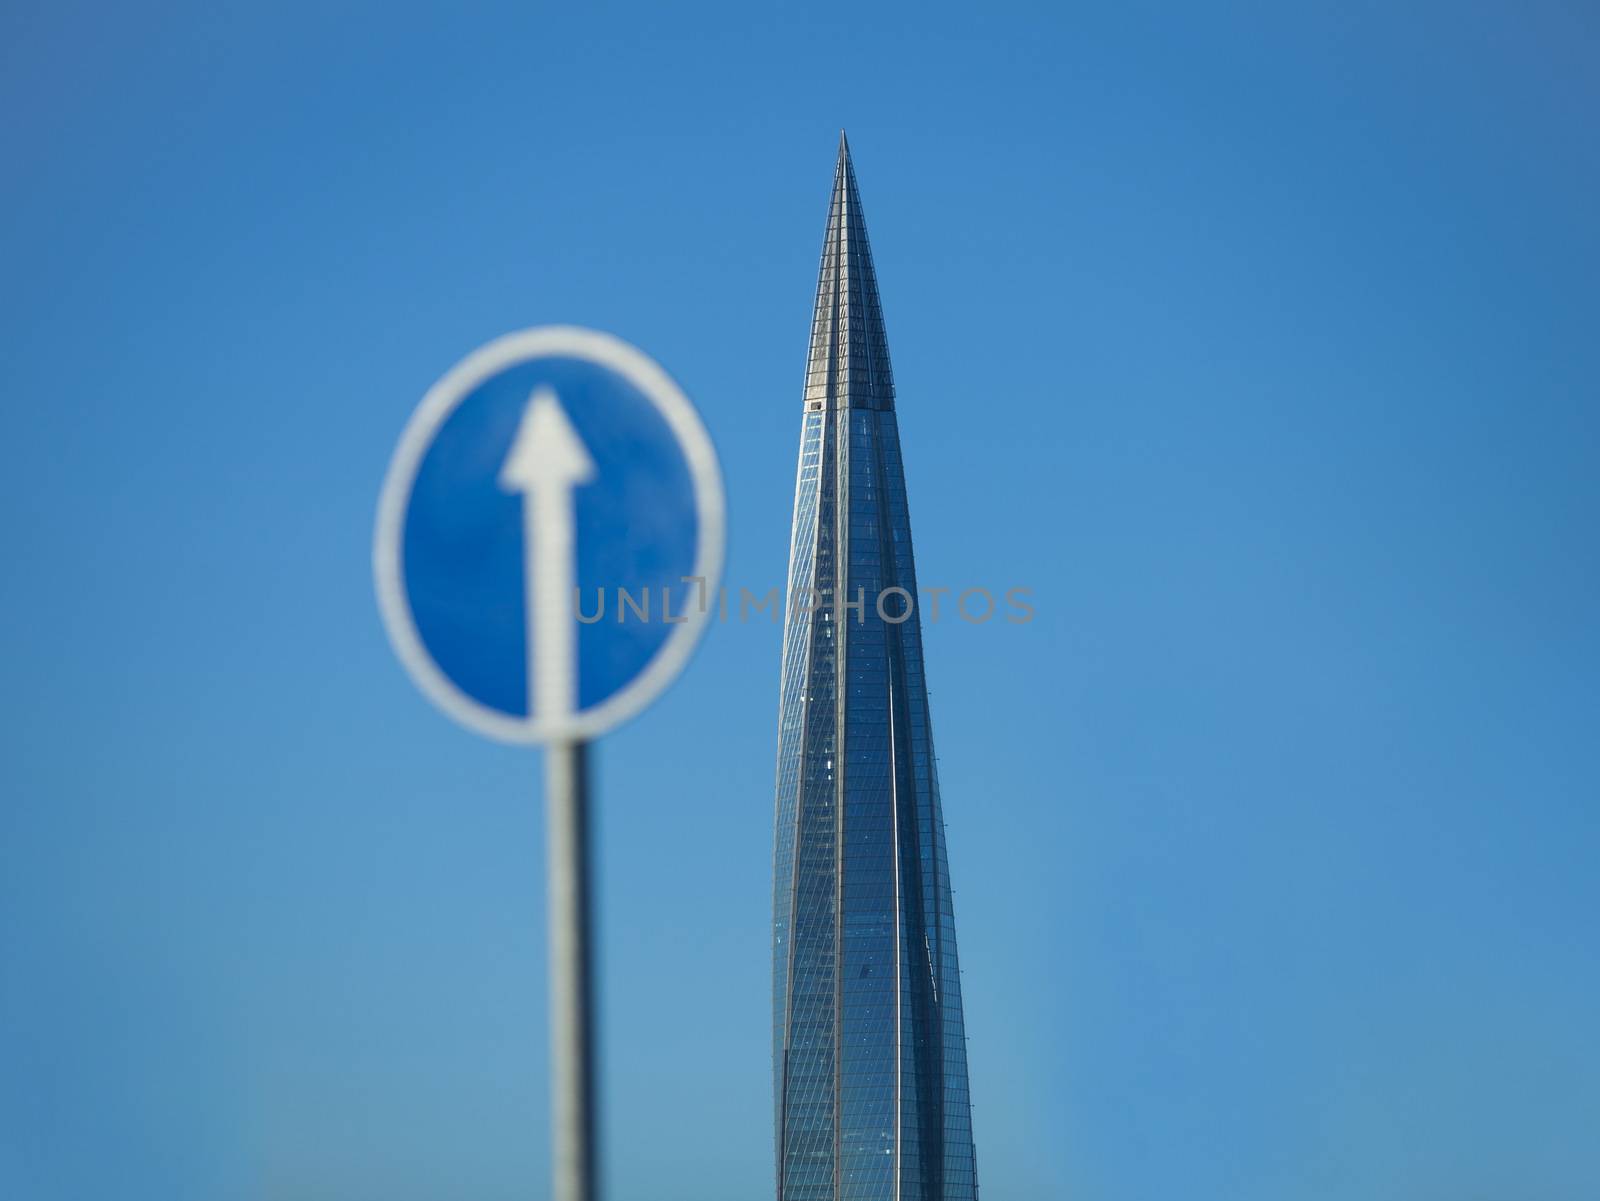 skyscraper spire and a Road sign white arrow up, concept of movement and business success